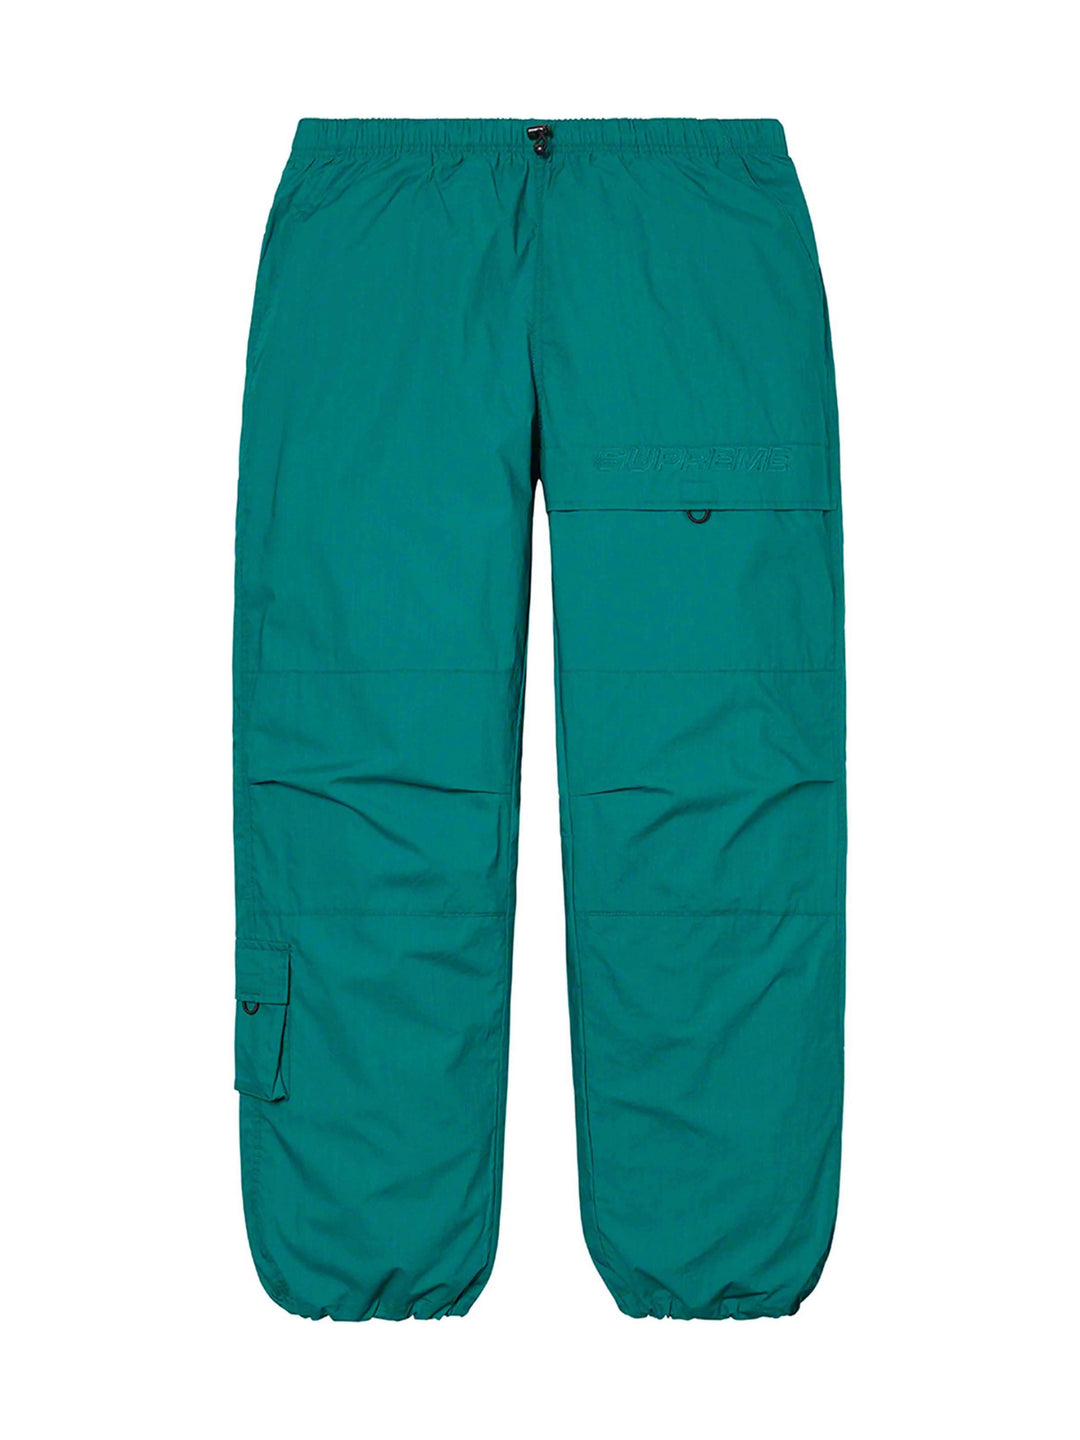 Supreme Cotton Cinch Pant Teal [SS21] Prior